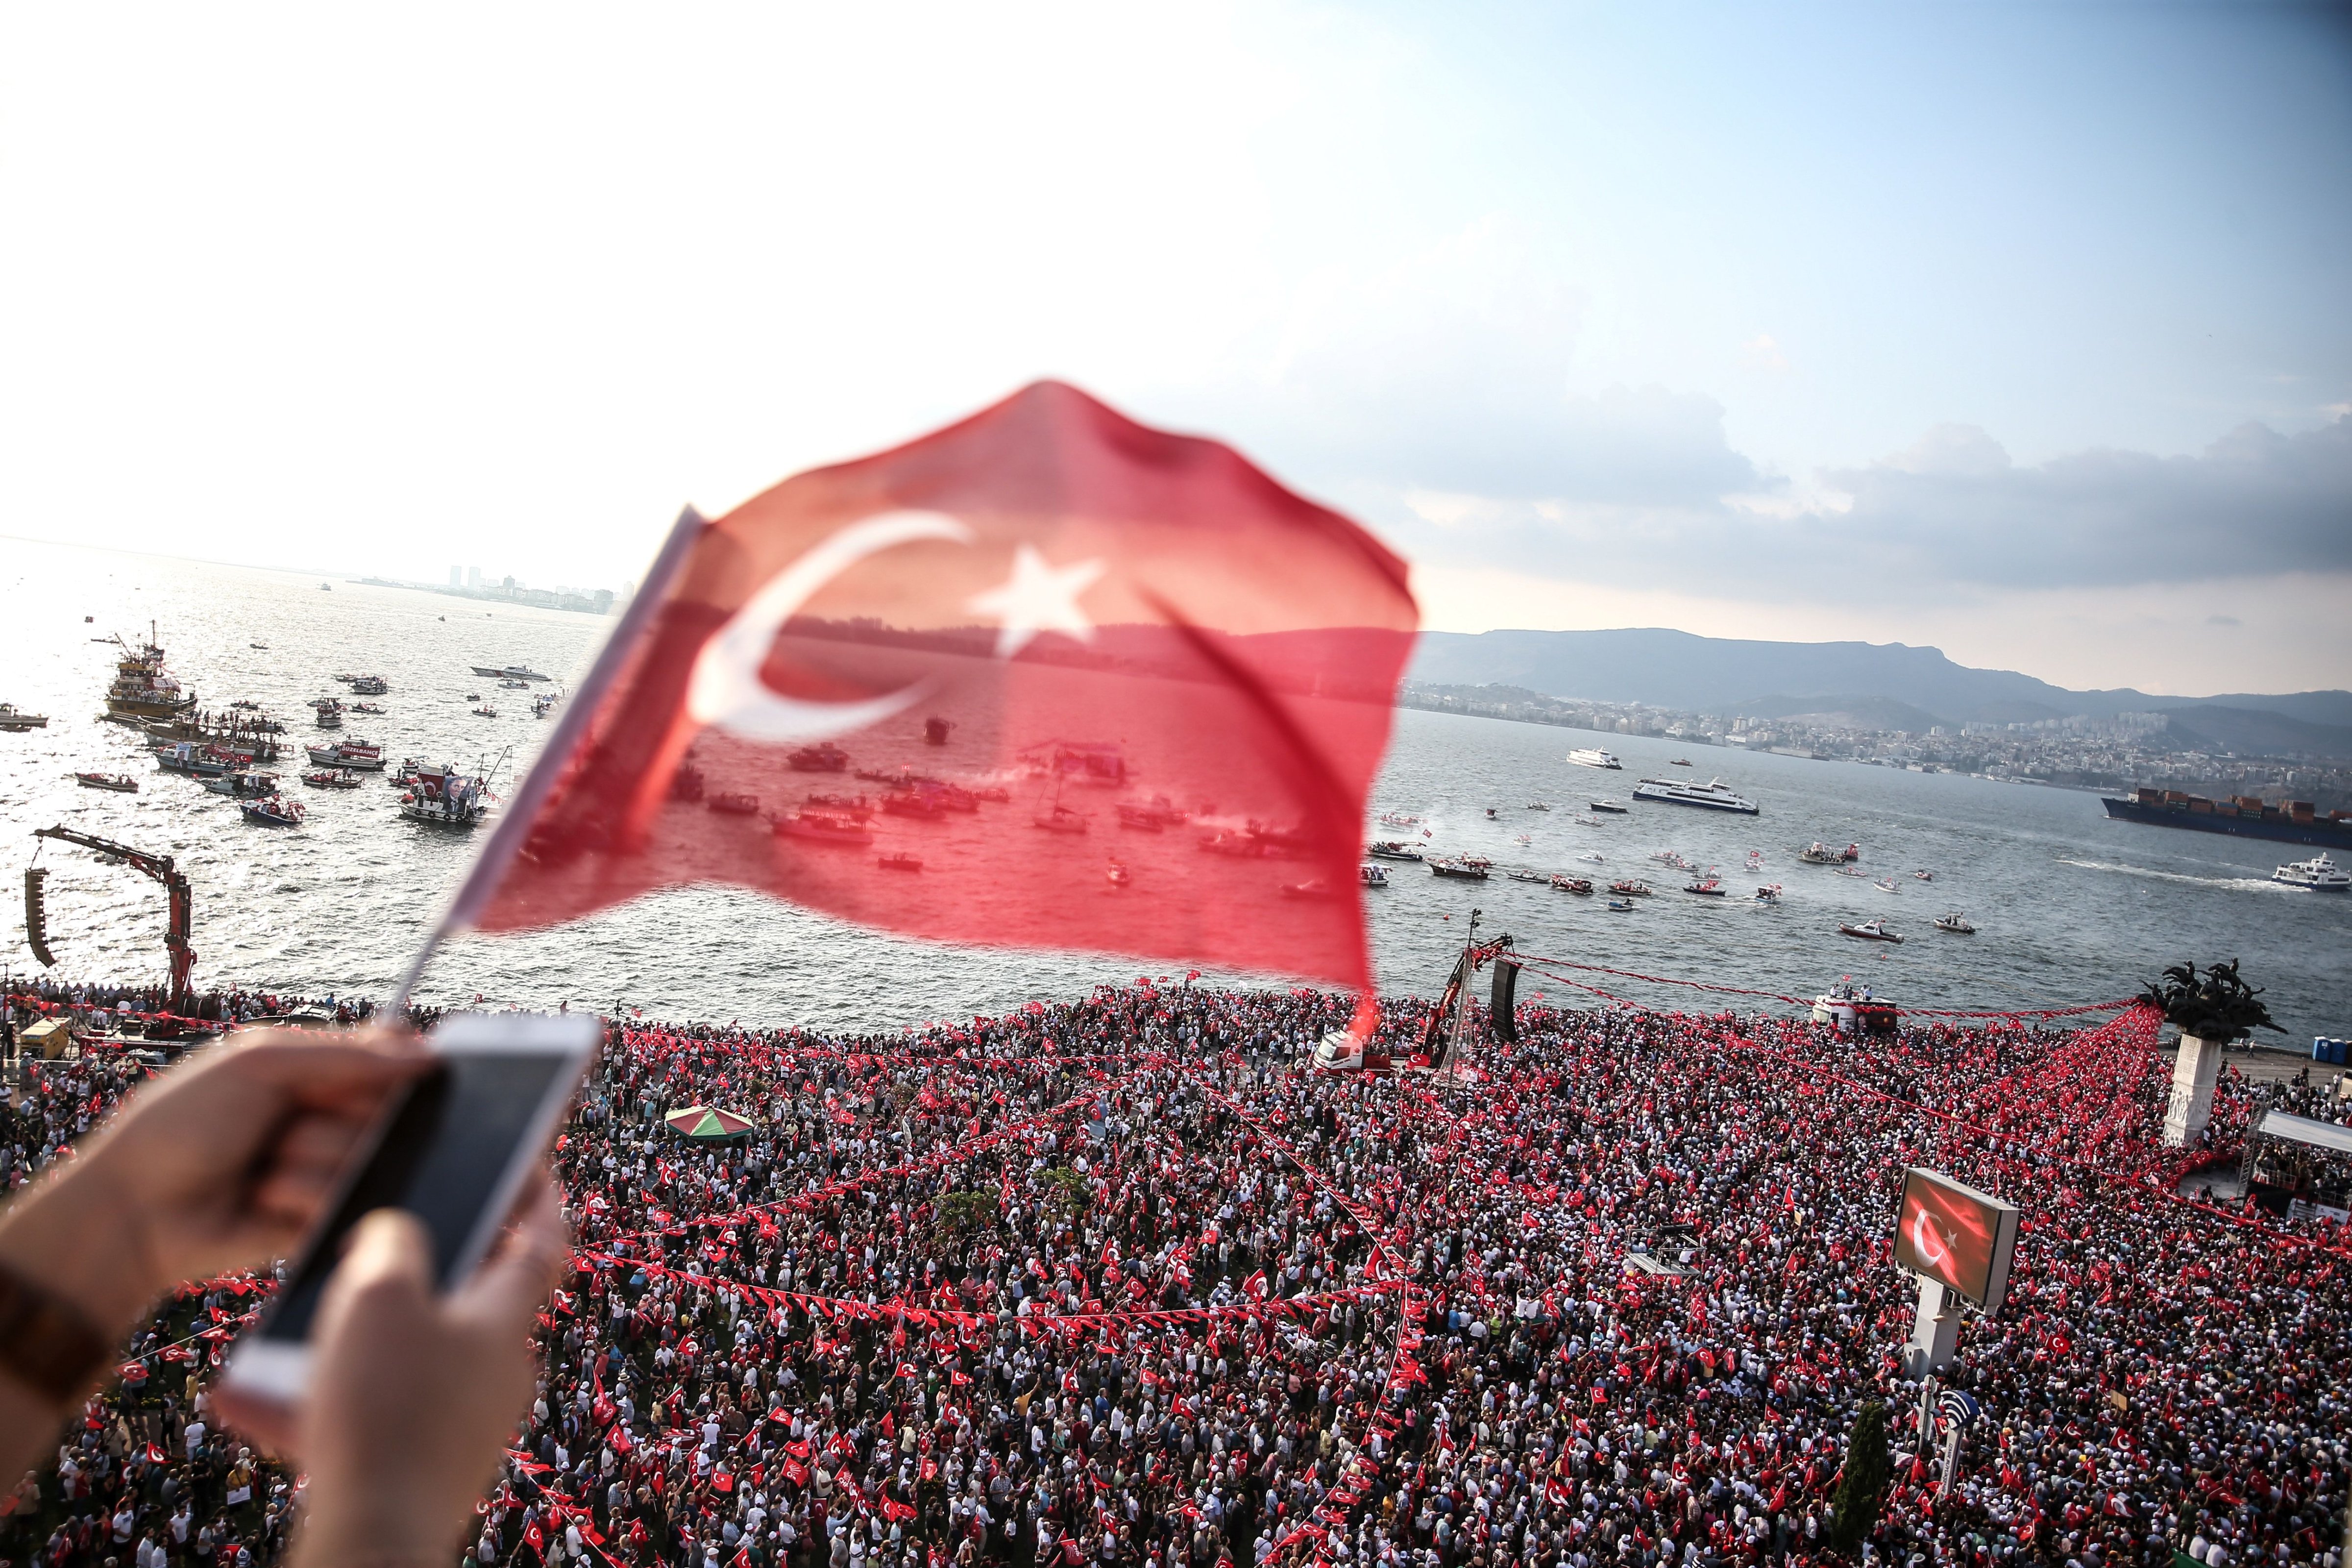 Thousands of supporters gathered to listen to Muharrem Ince, the leader and presidential candidate of Turkey's main opposition party the Republican People's Party (CHP) as he gives an address during a campaign rally in Izmir on June 21, 2018, three days prior to presidential and parliamentary elections. (—AFP/Getty Images)